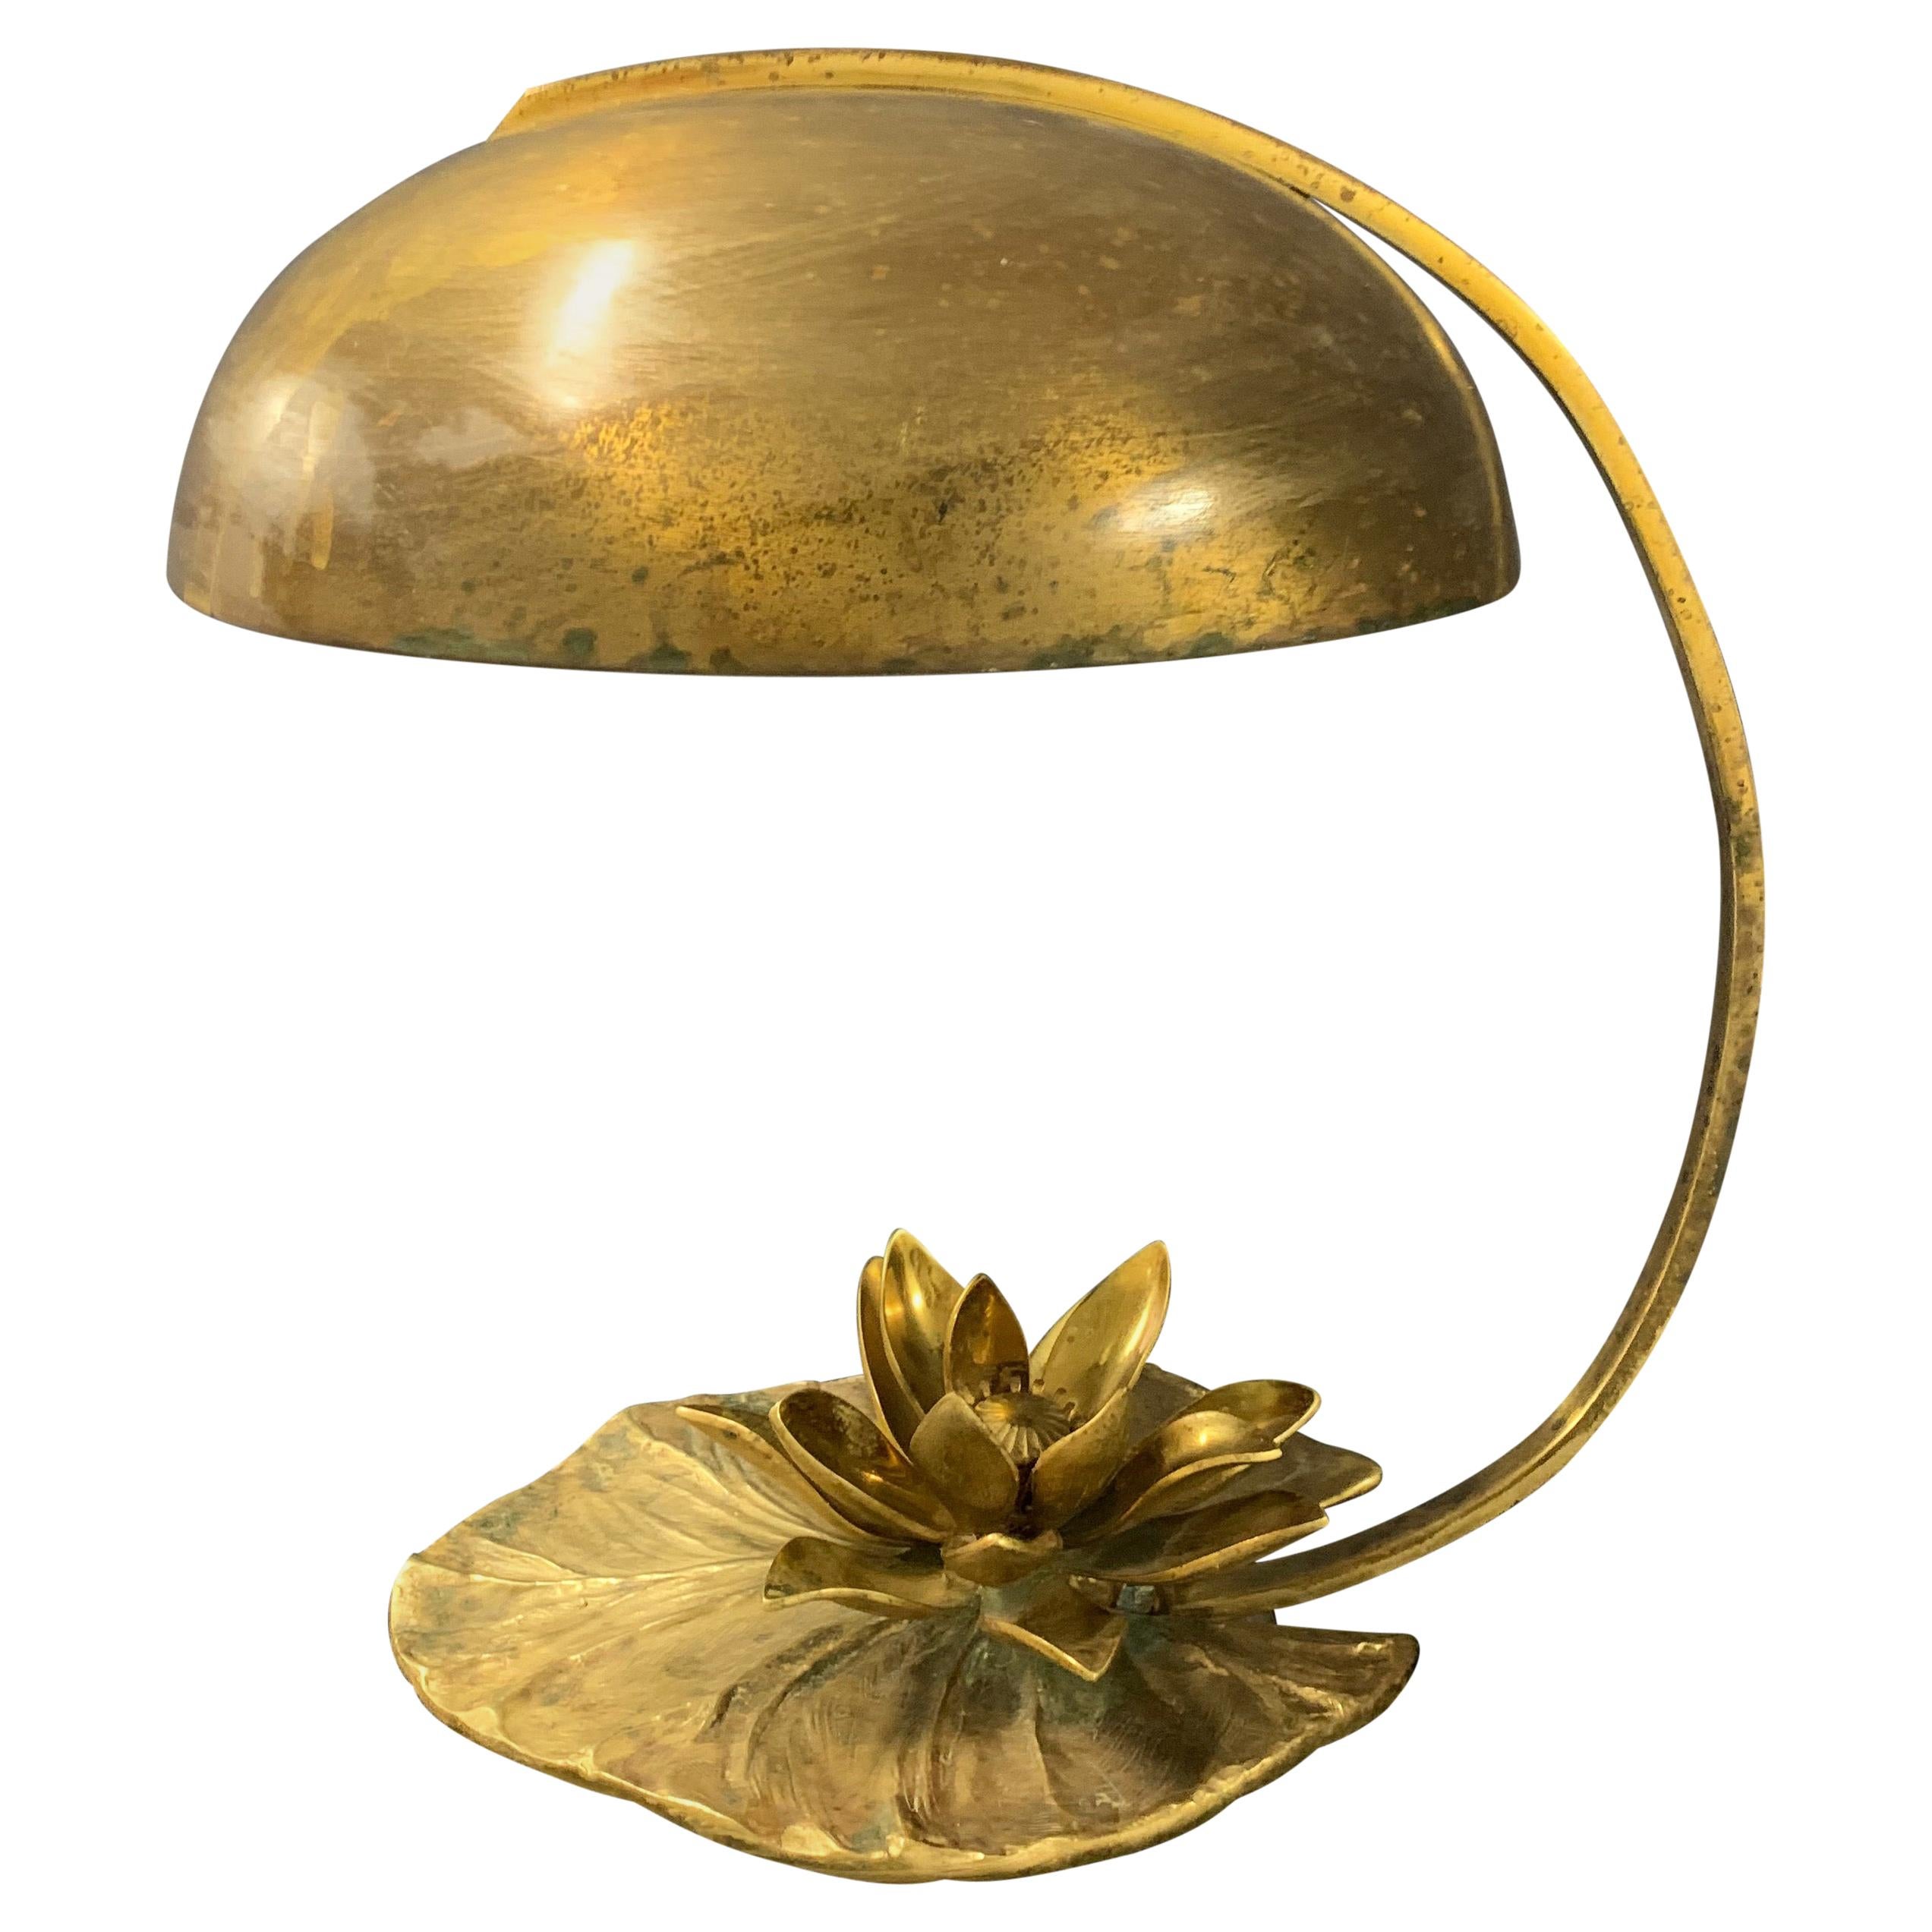 Amazing Water Lily / Nenuphar Table Lamp with Crazy Patina